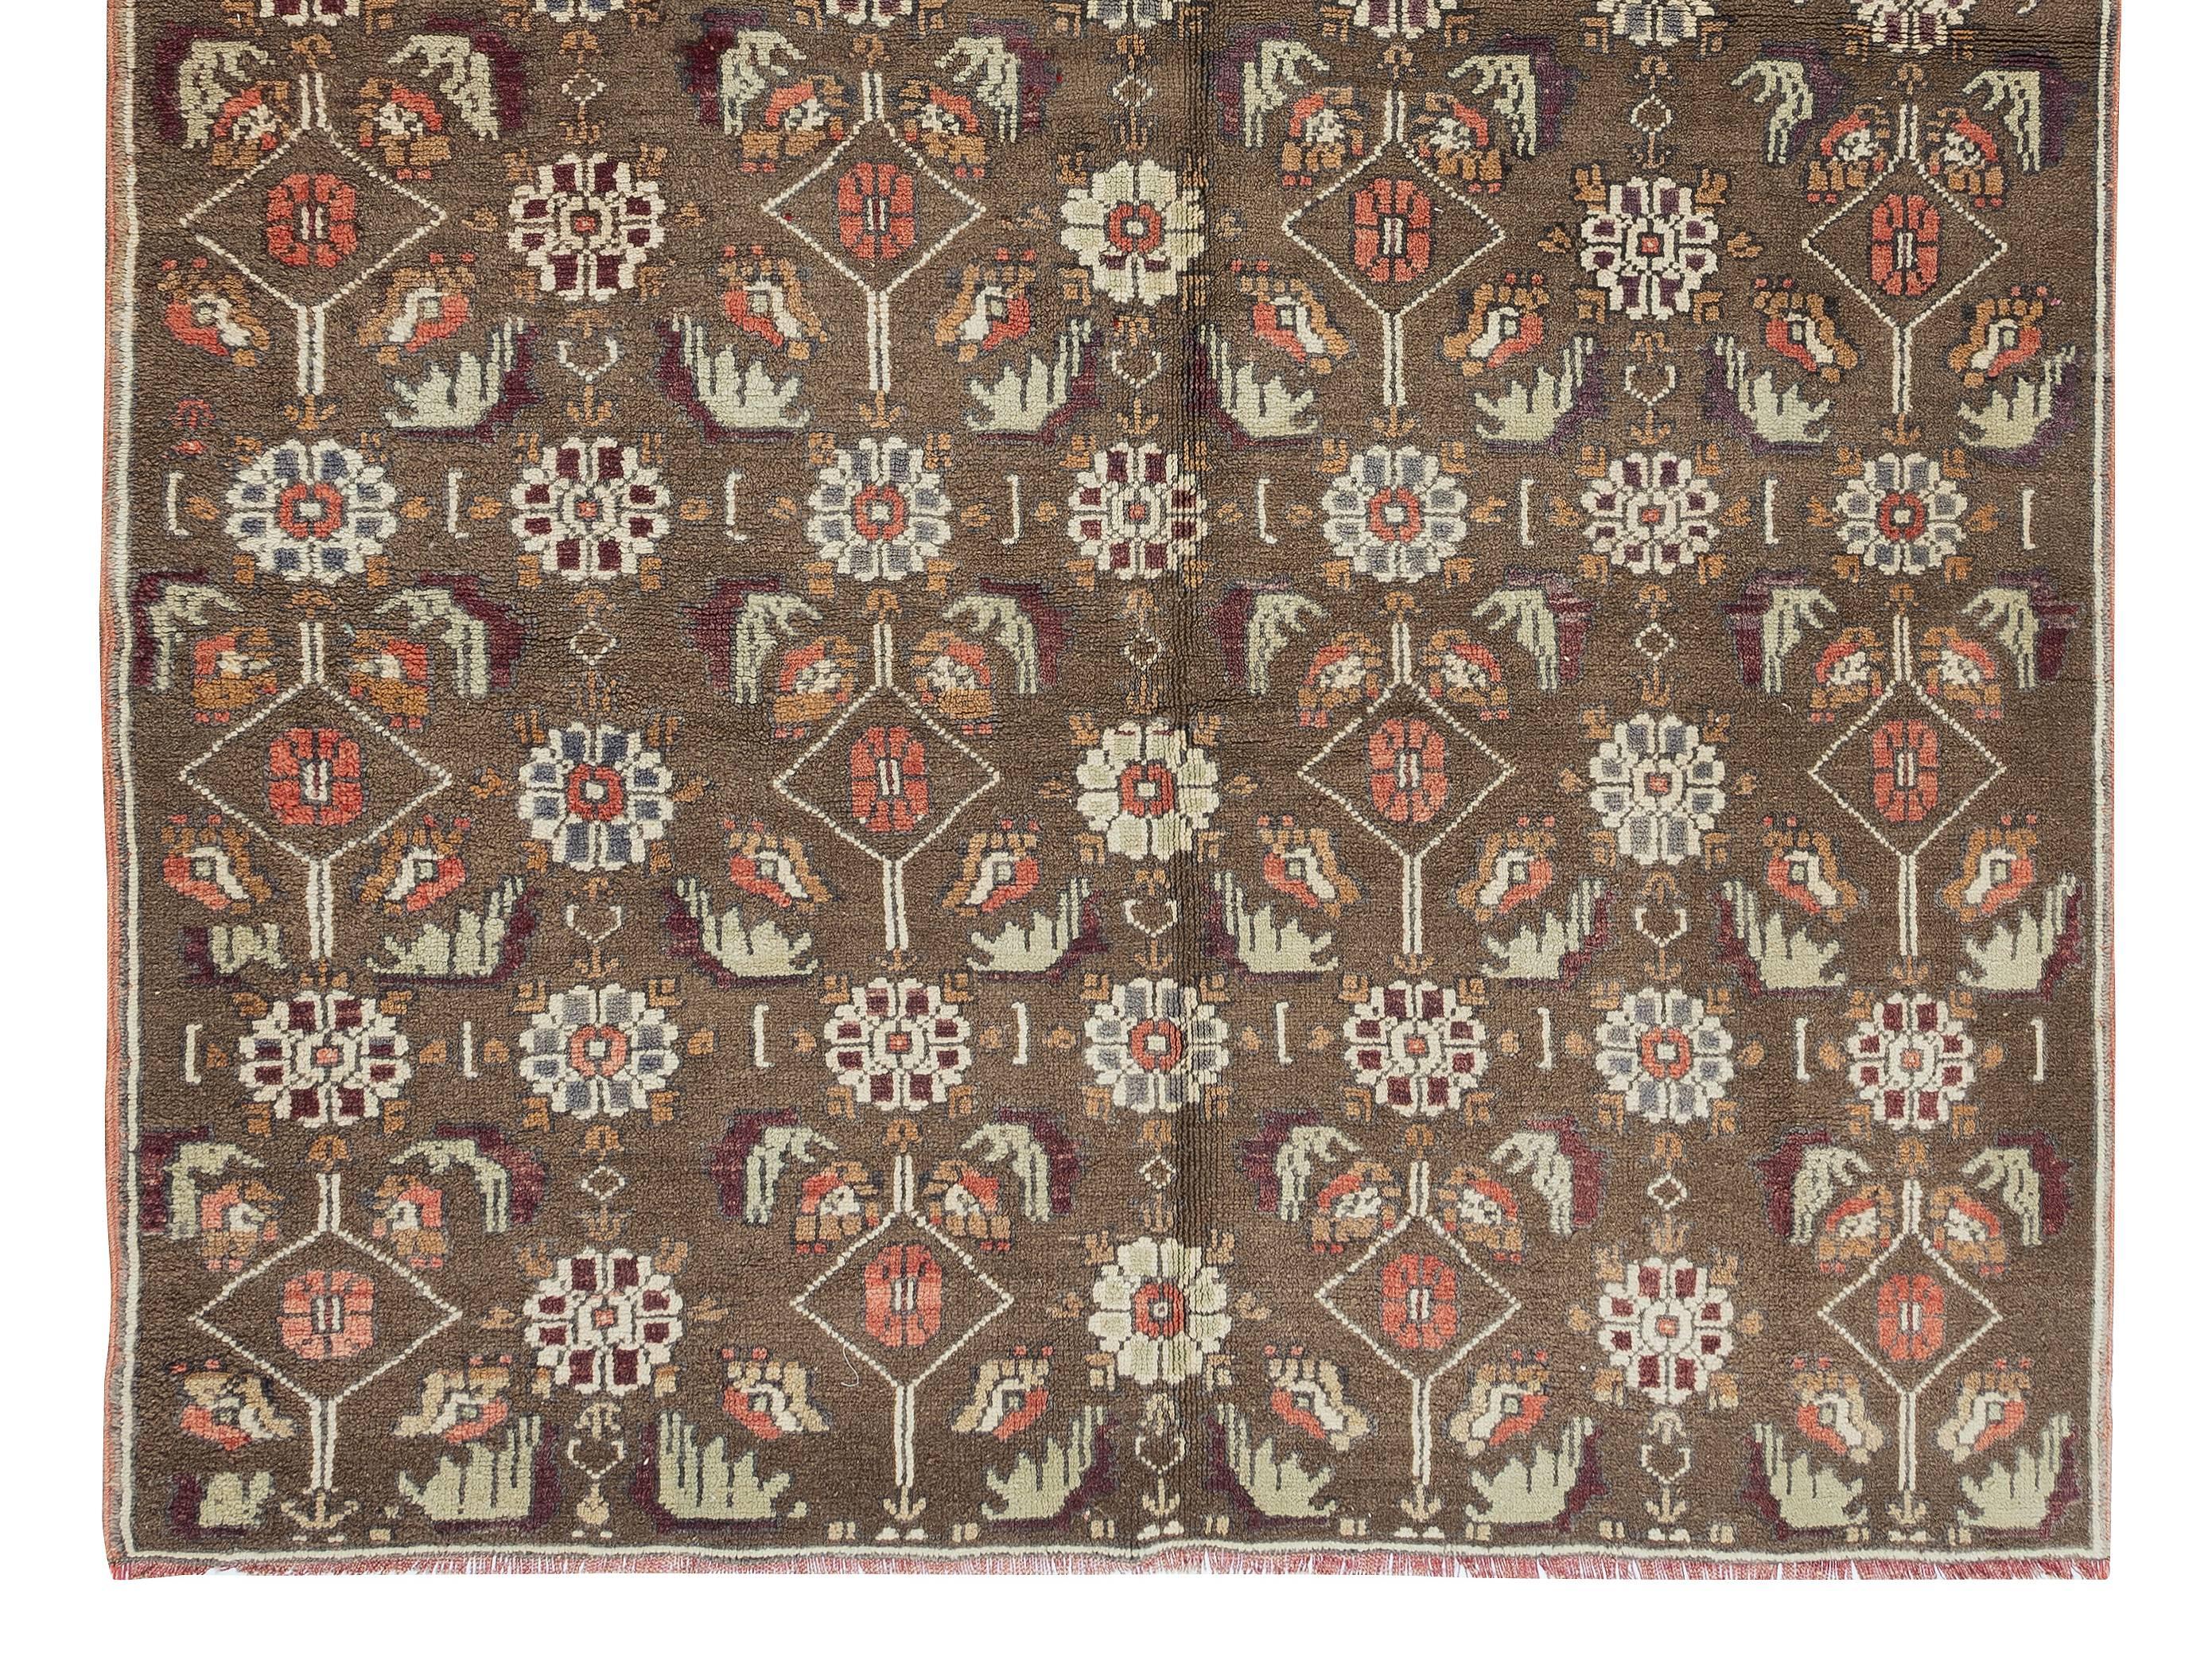 Hand-Woven 5.9x8.9 Ft Home Decor Floral Pattern Vintage Hand Knotted Anatolian Rug in Brown For Sale